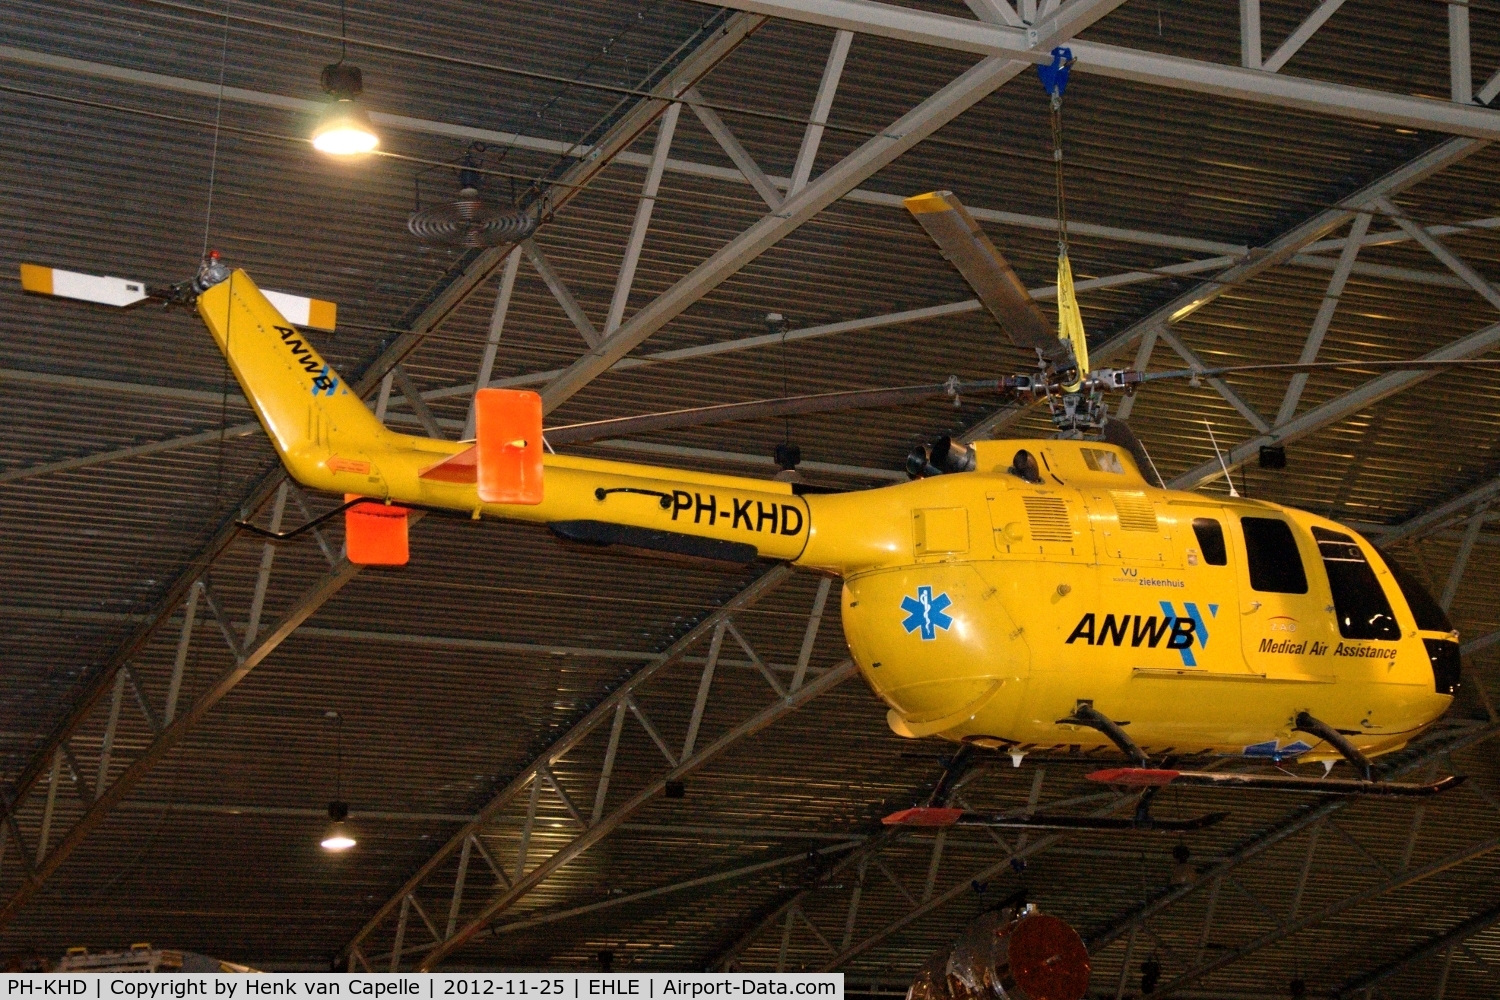 PH-KHD, 1977 MBB Bo-105CBS-4 C/N S-324, Bölkow Bo-105CBS-4 medevac helicopter of the ANWB Medical Air Assistance (Dutch Automobile Club) hanging in the Aviodrome aviation museum at Lelystad, the Netherlands.